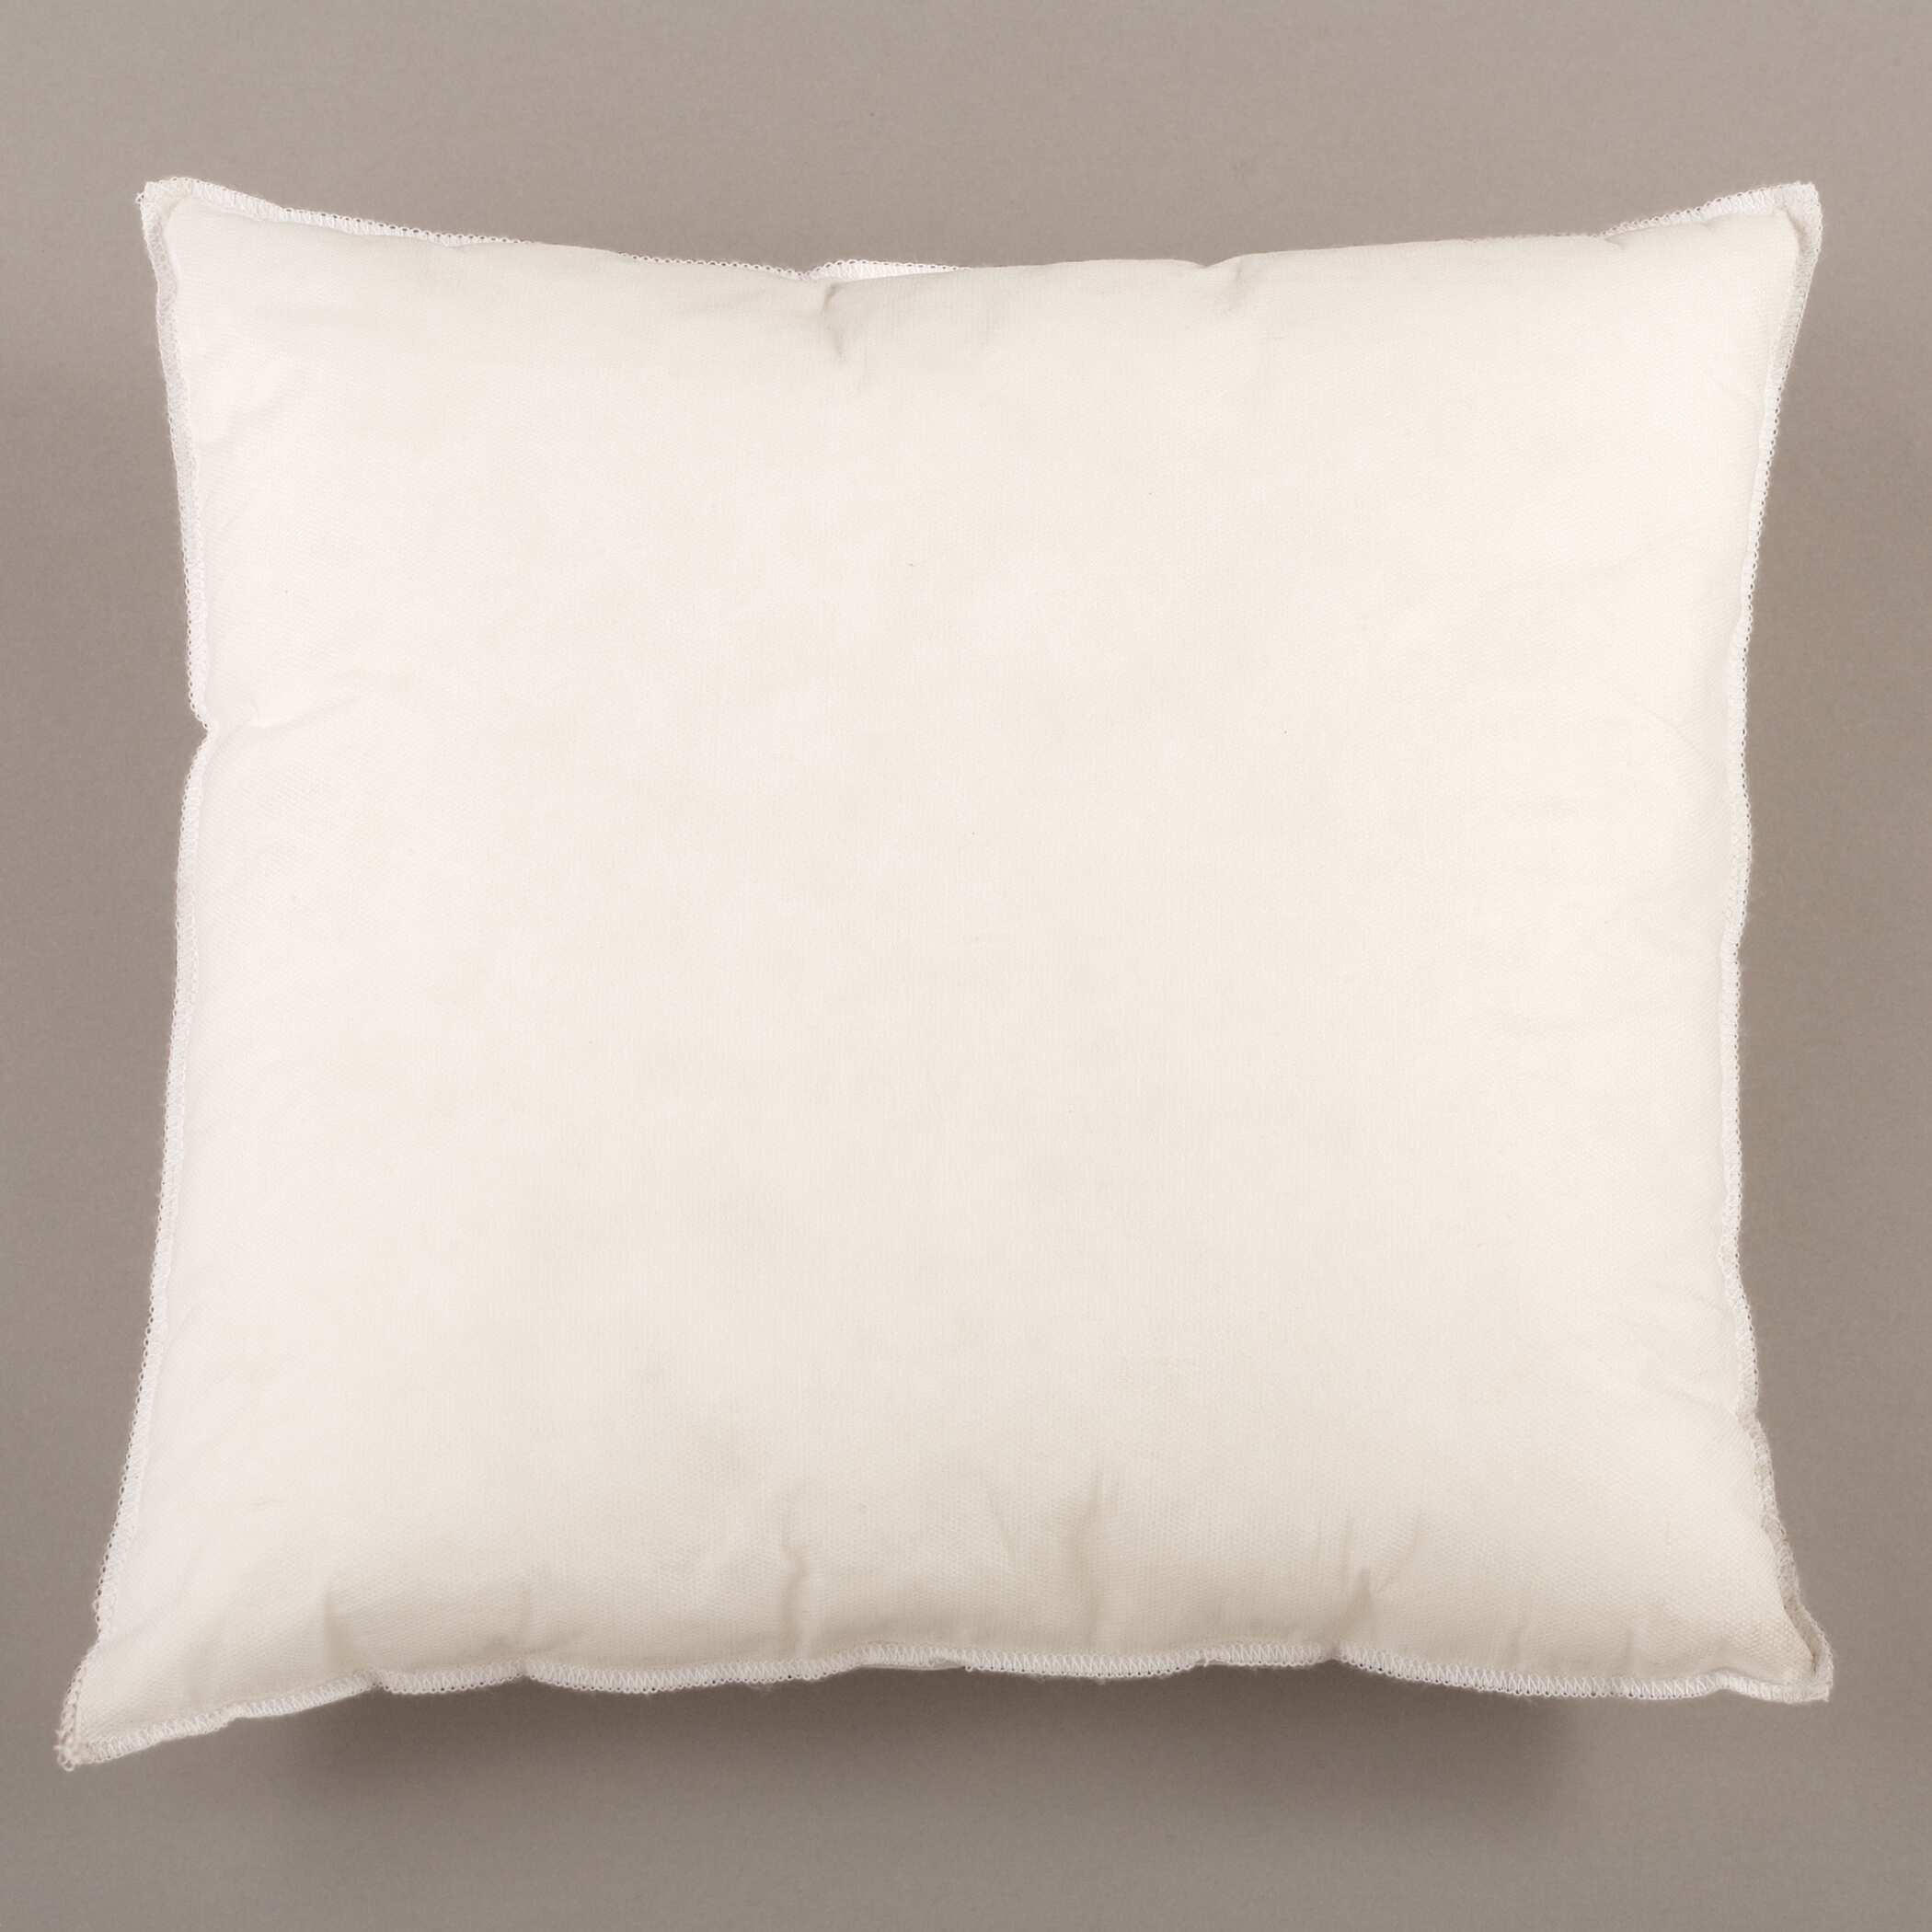 White Standard Square Polyester Pillow Form Insert 17"